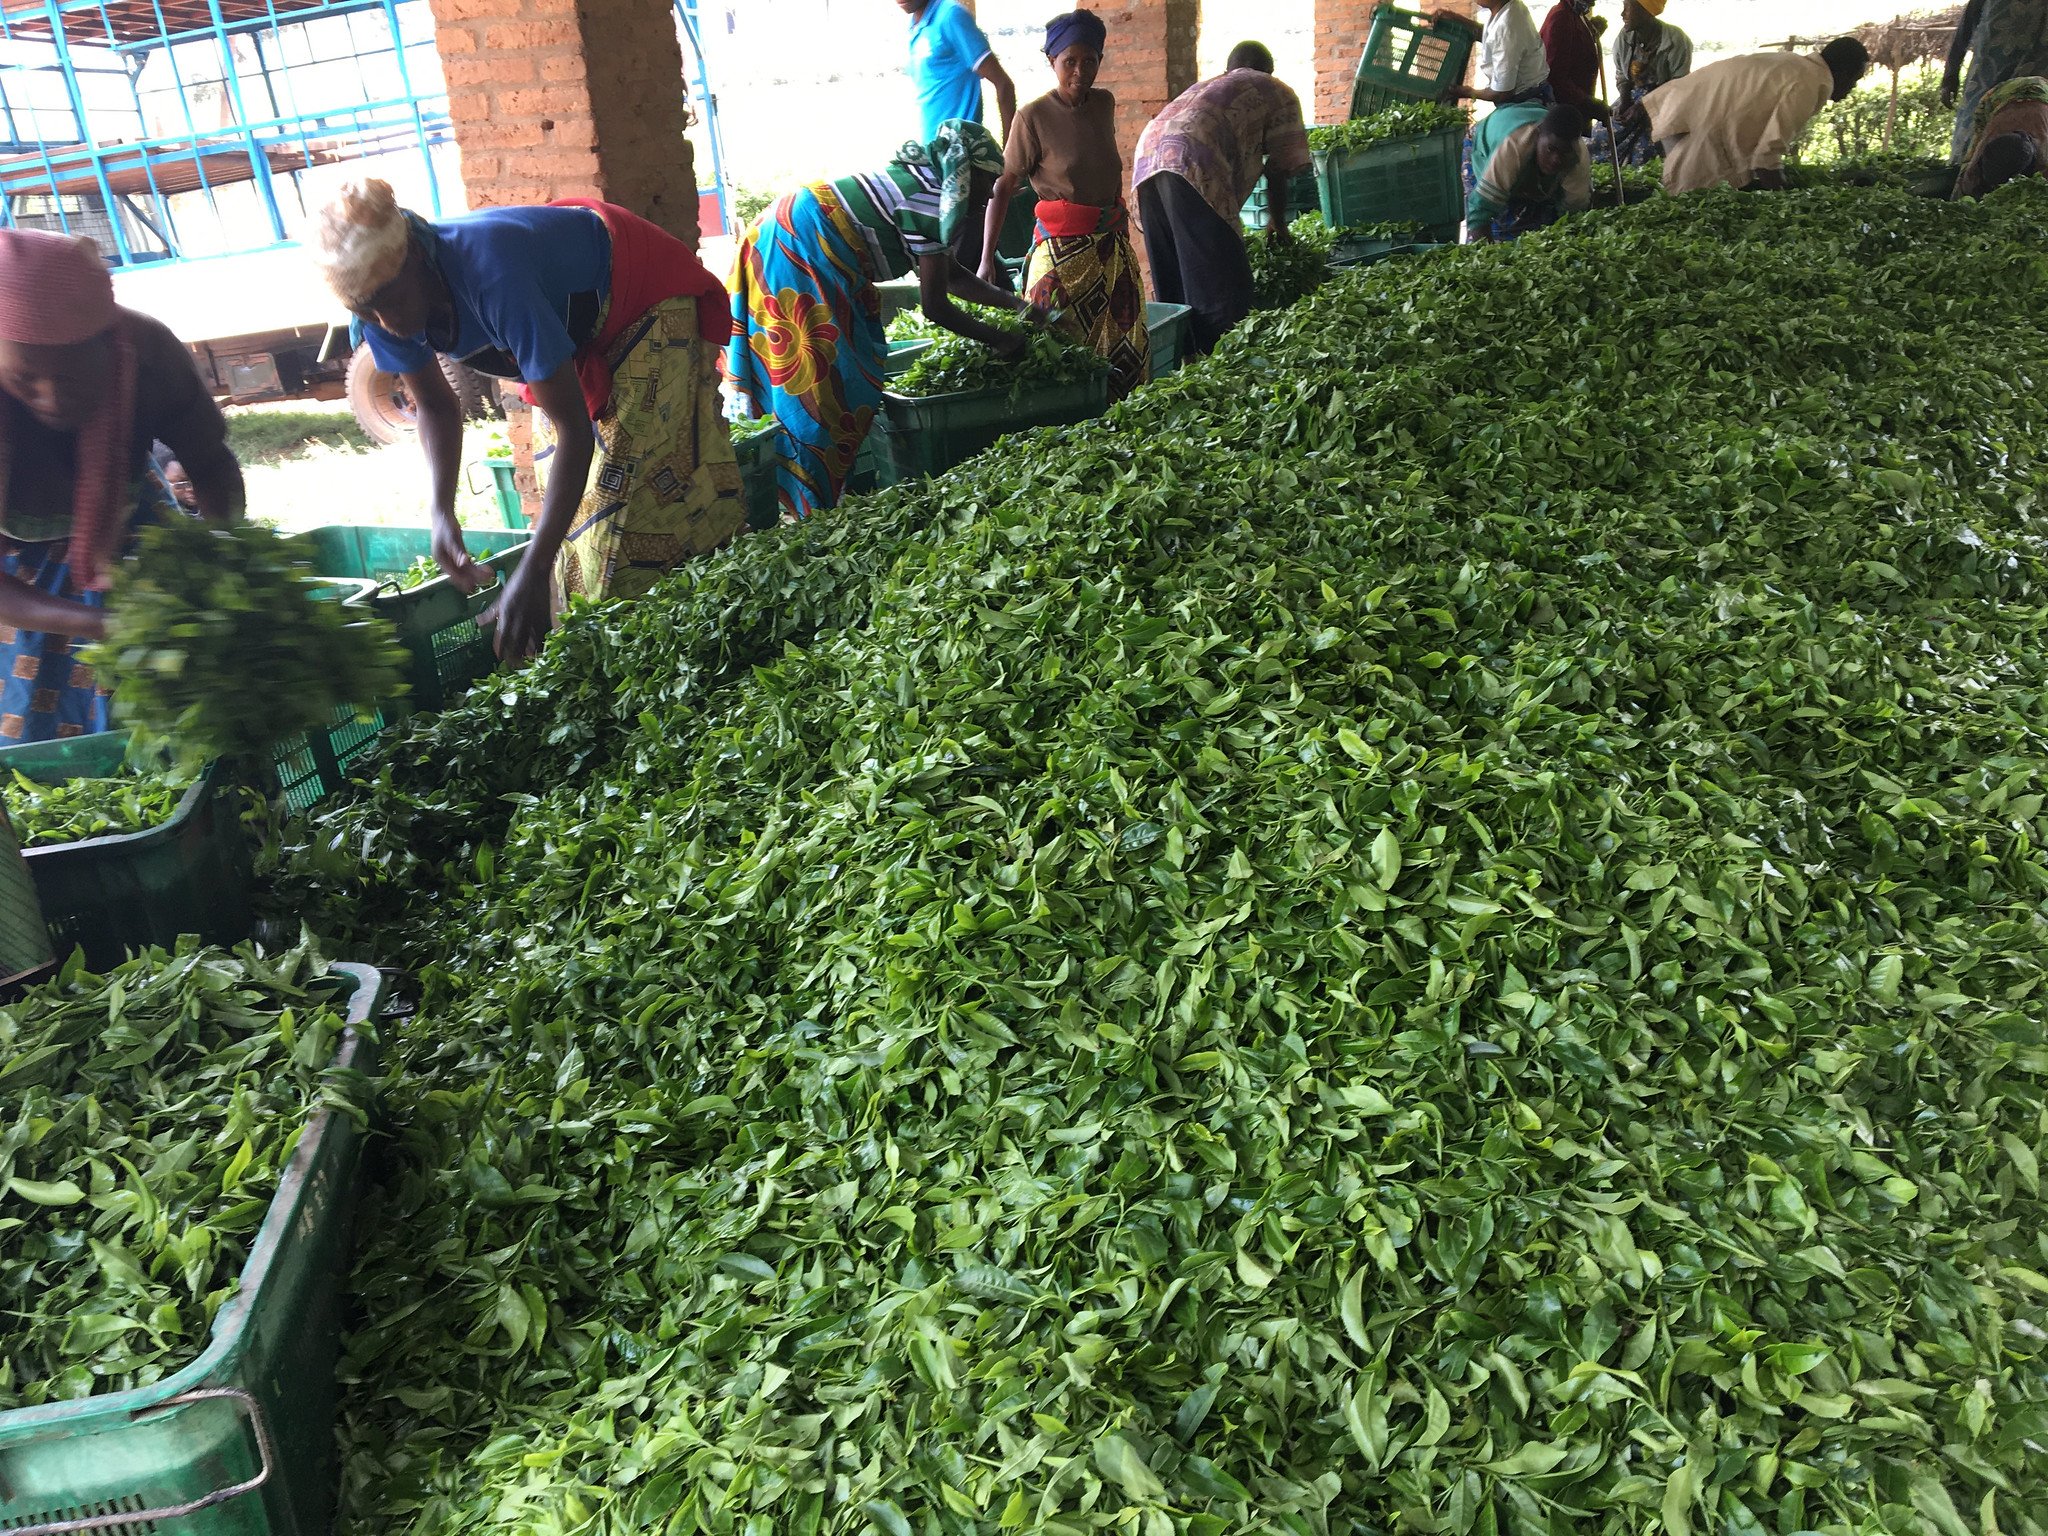 Workers Drop Off Their Morning's Work of Tea Picking for Withering